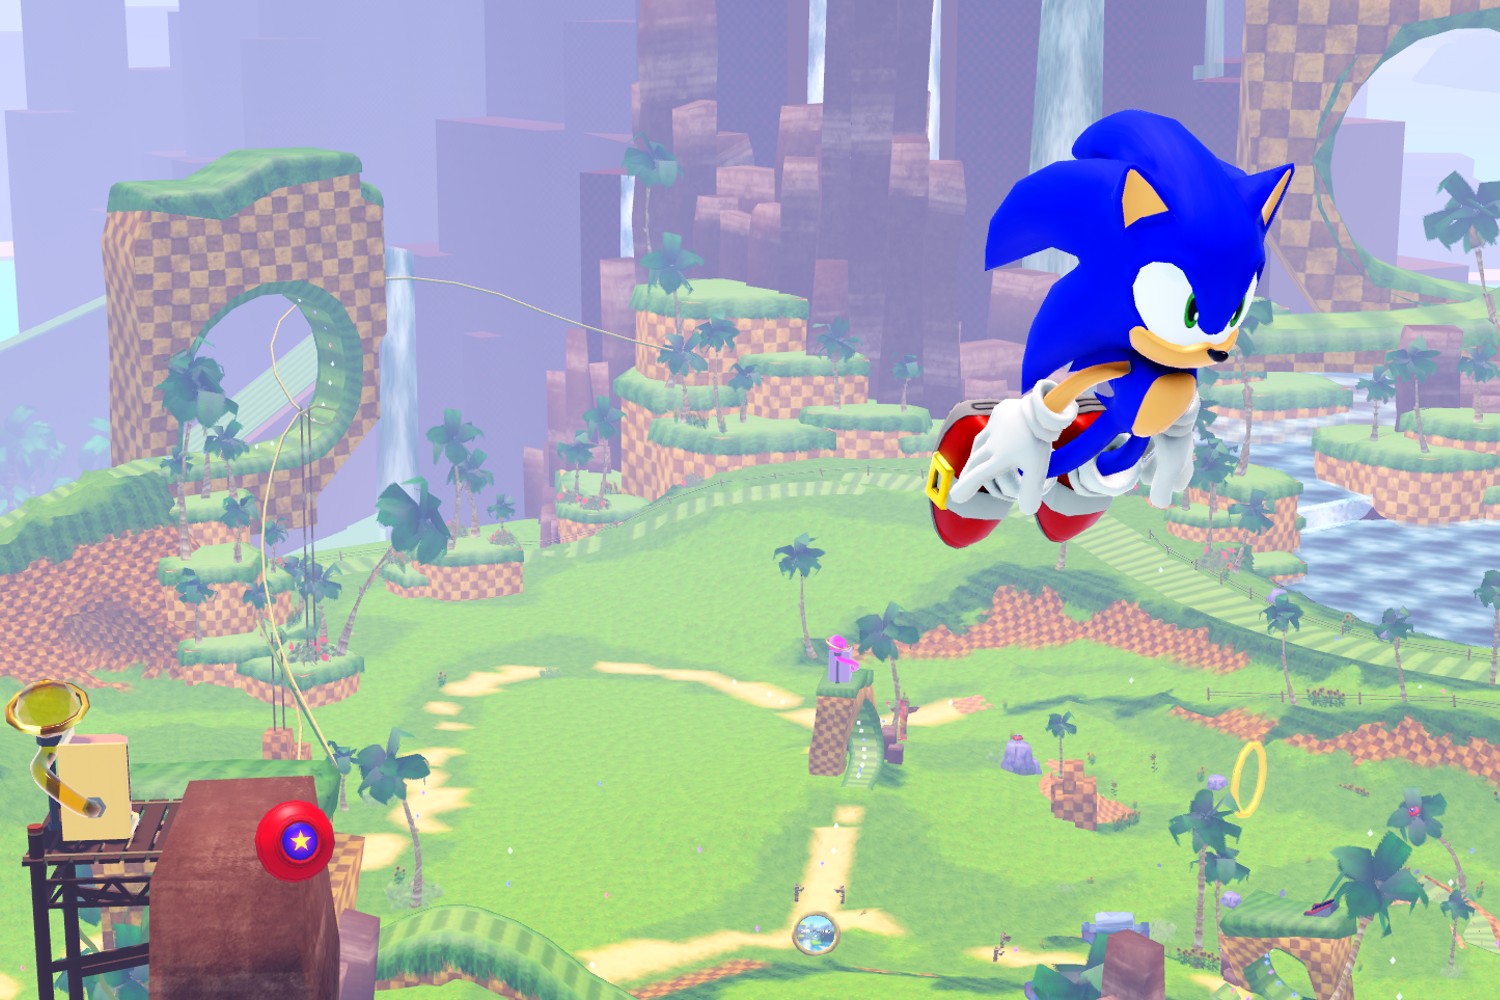 This boost levels you up fast in Roblox Sonic Speed Sim #roblox